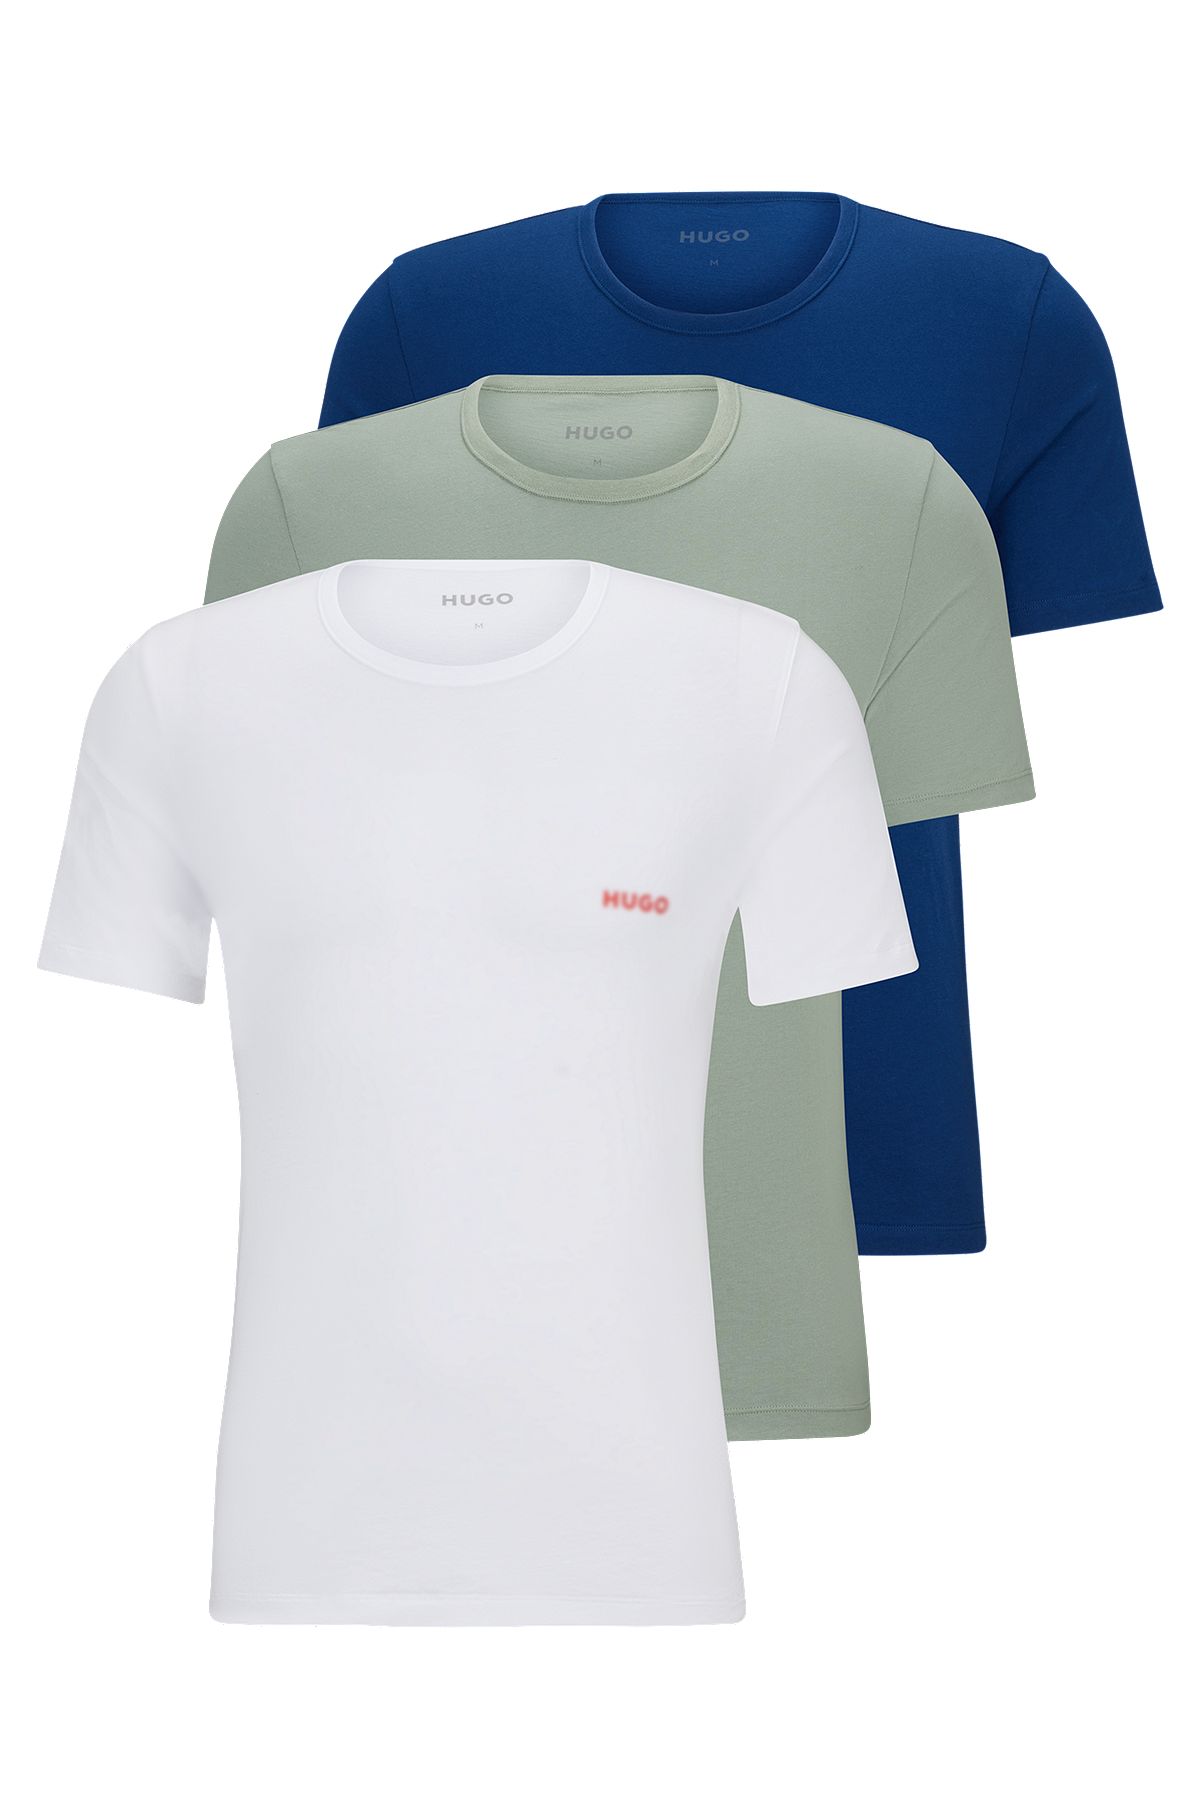 HUGO - Triple-pack of logo cotton with underwear print T-shirts